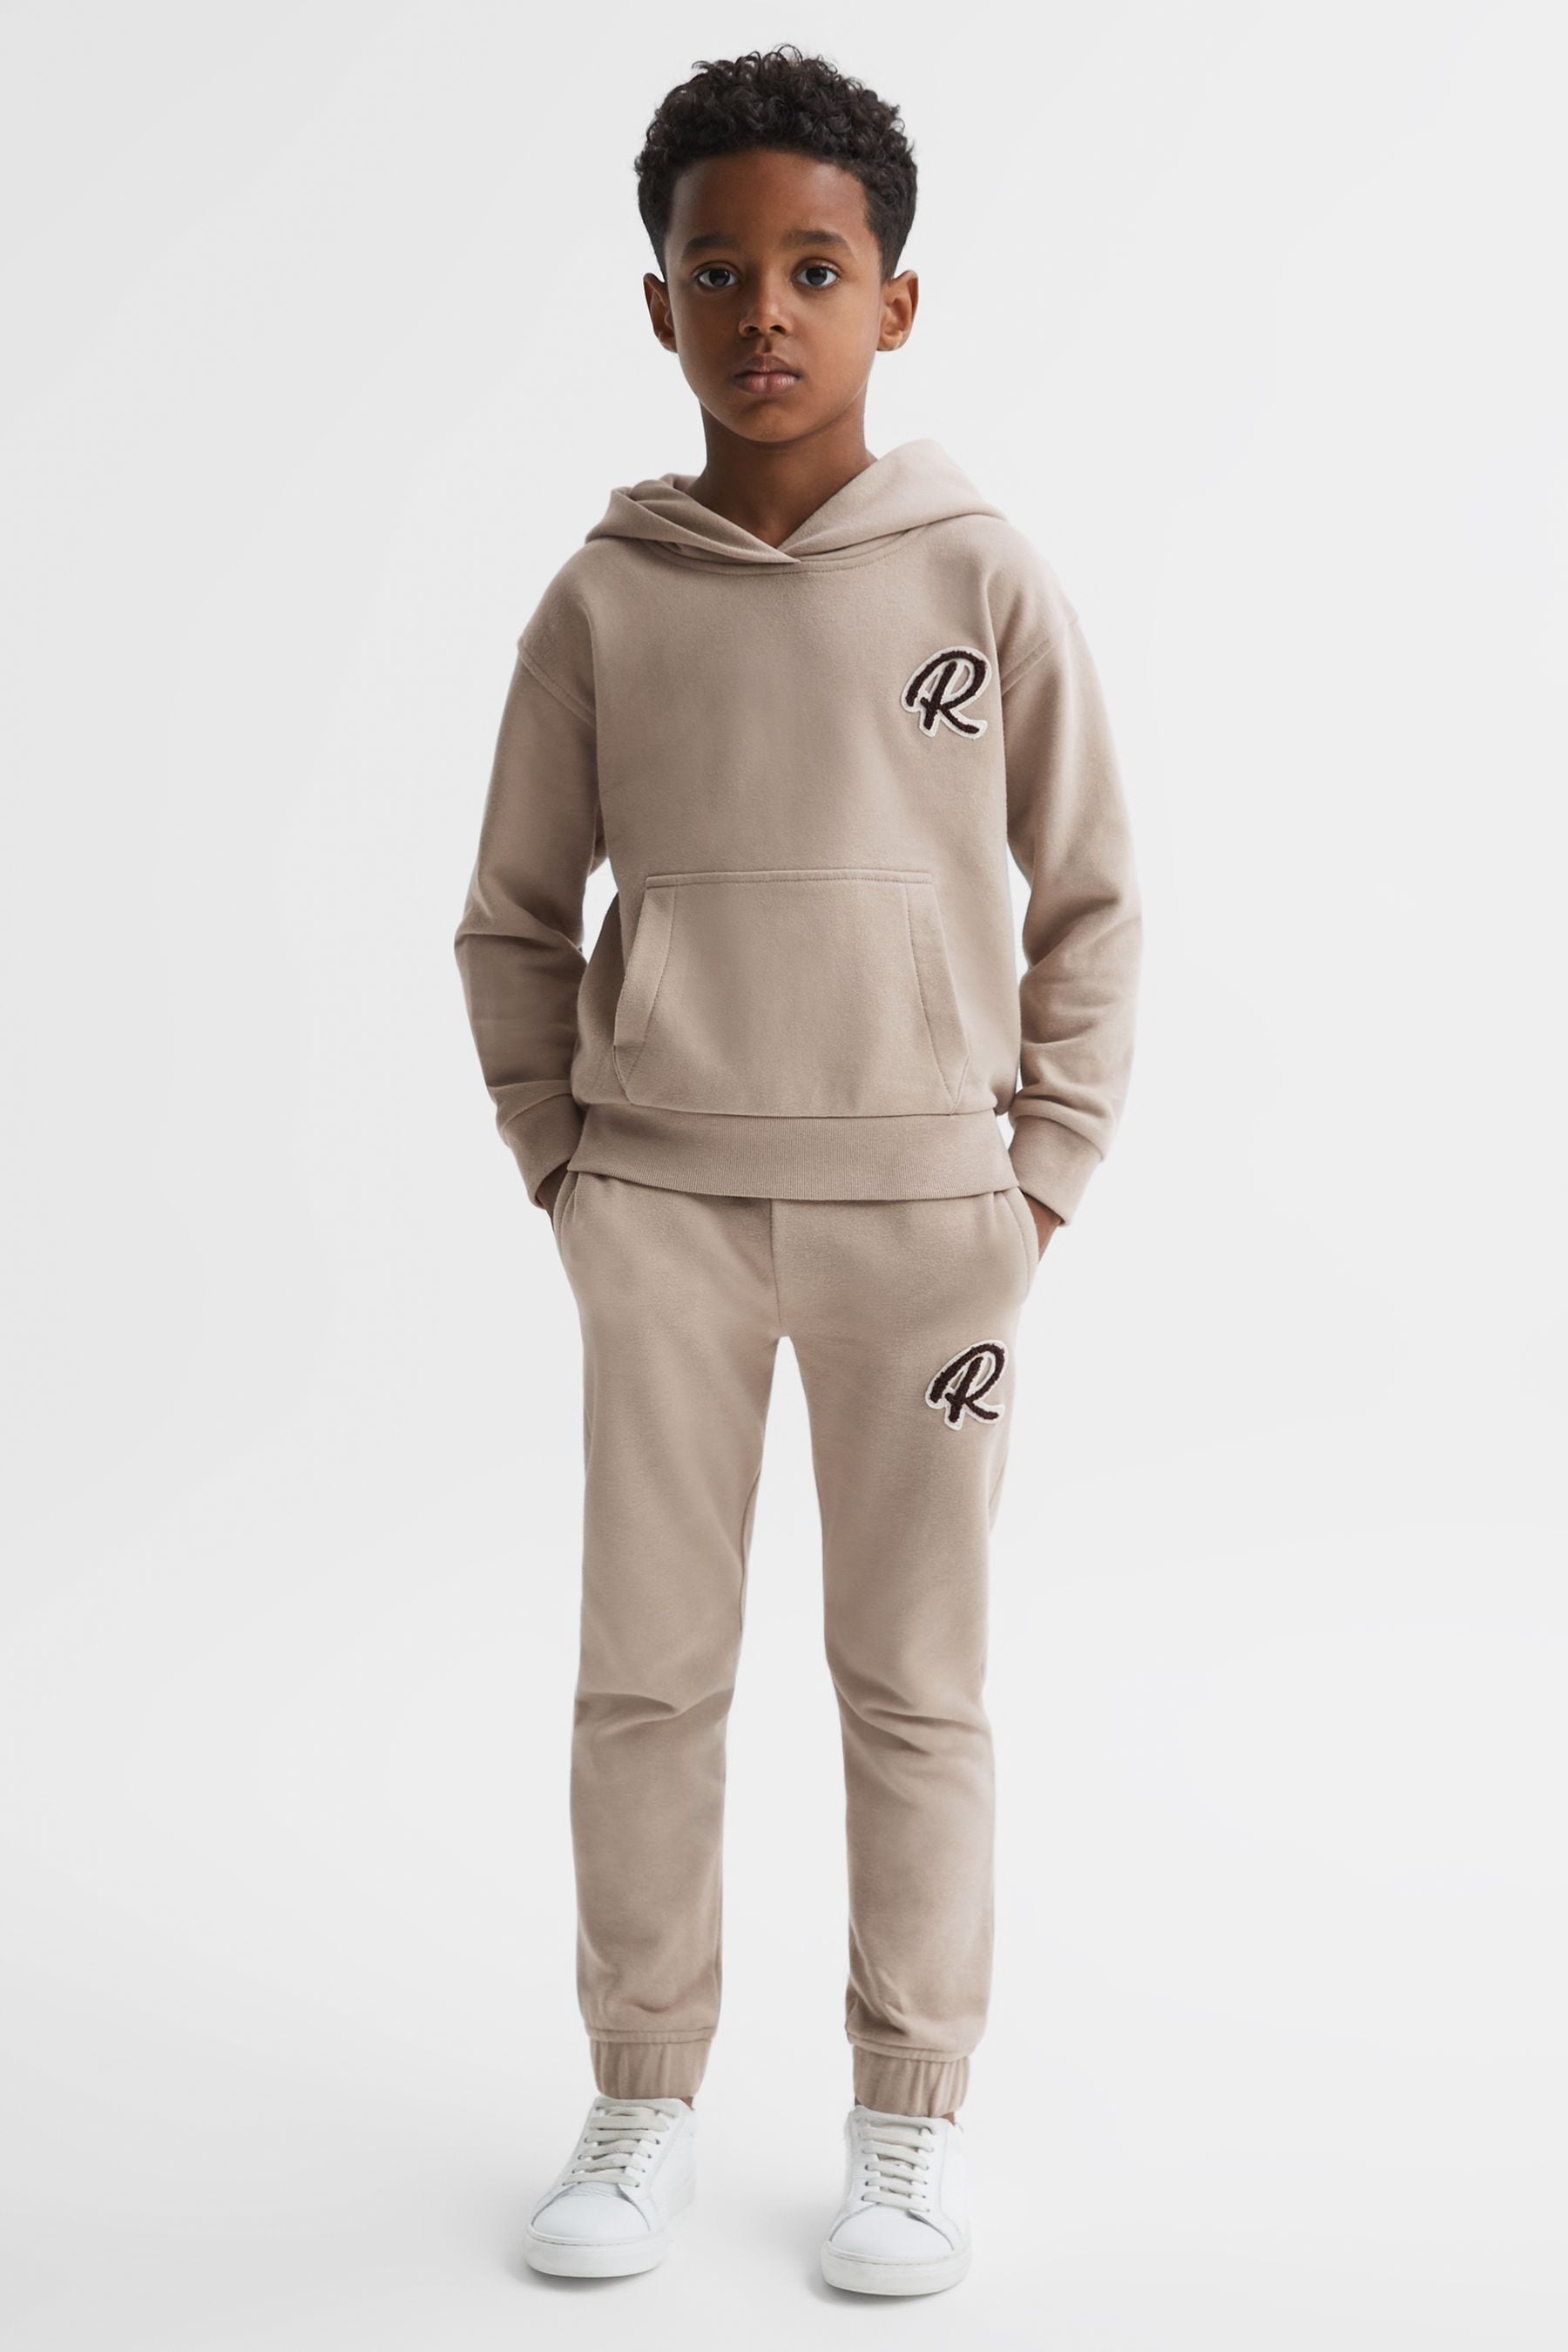 Reiss Kids' Toby - Taupe Junior Garment Dyed Logo Joggers, Age 5-6 Years